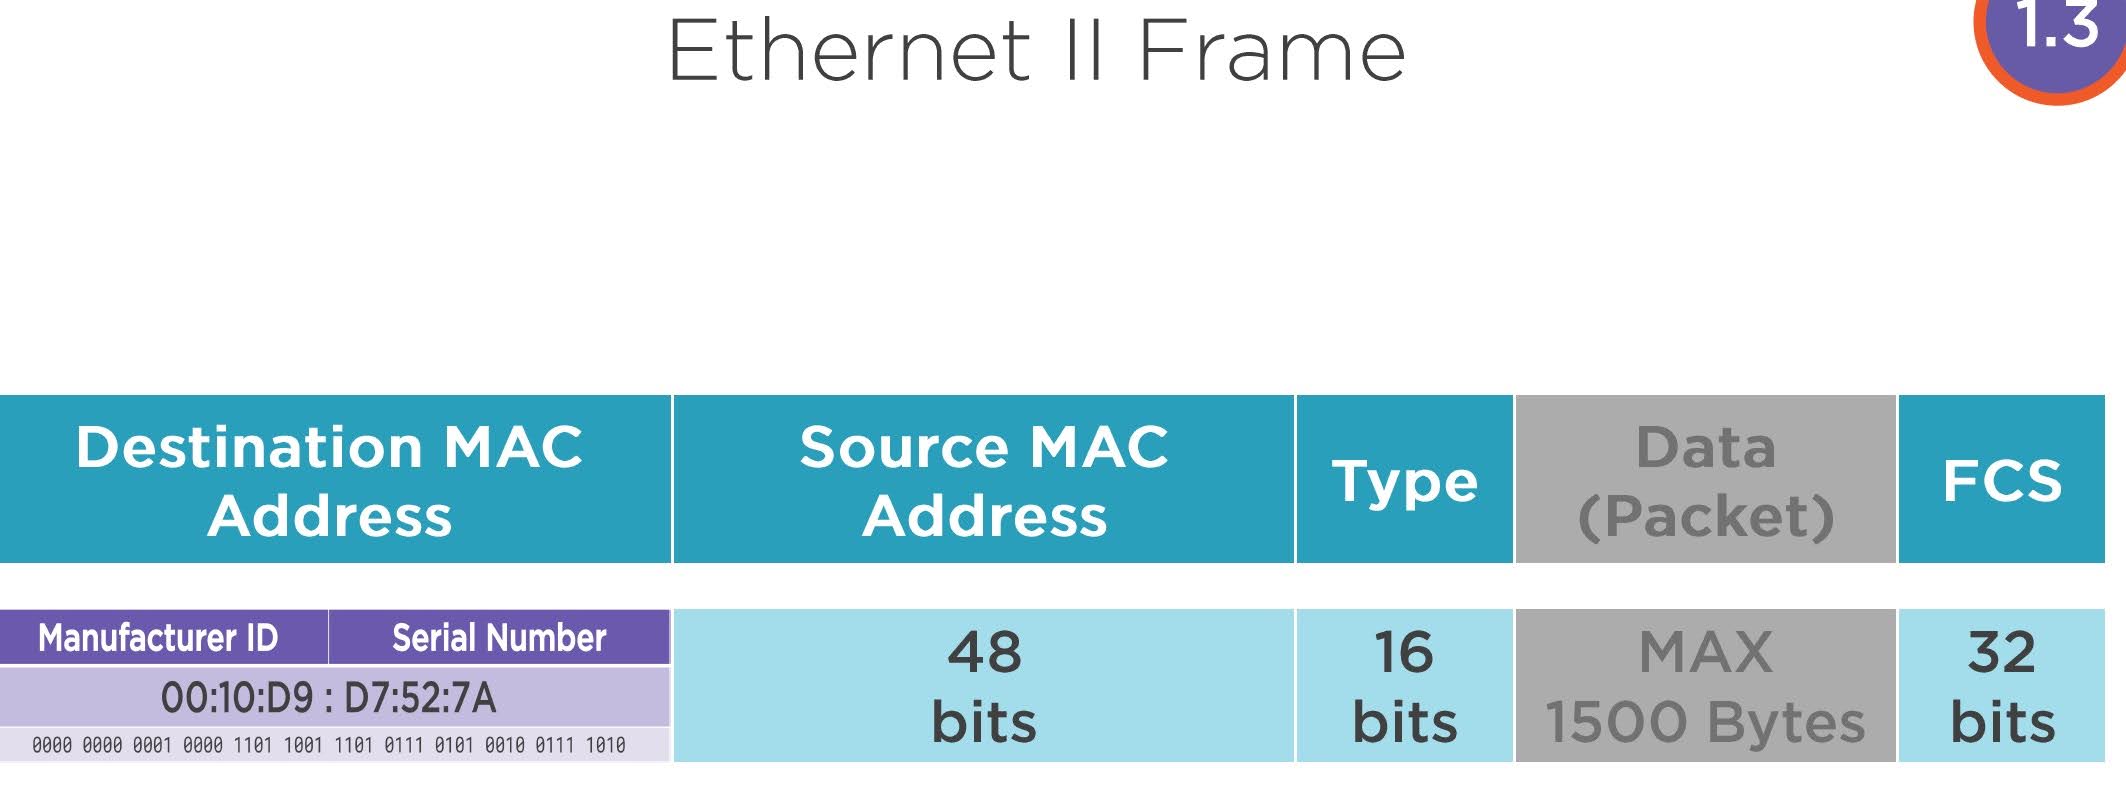 Destination MAC Address, Source MAC Address, Type, and FCS, these are all part of the Ethernet header.